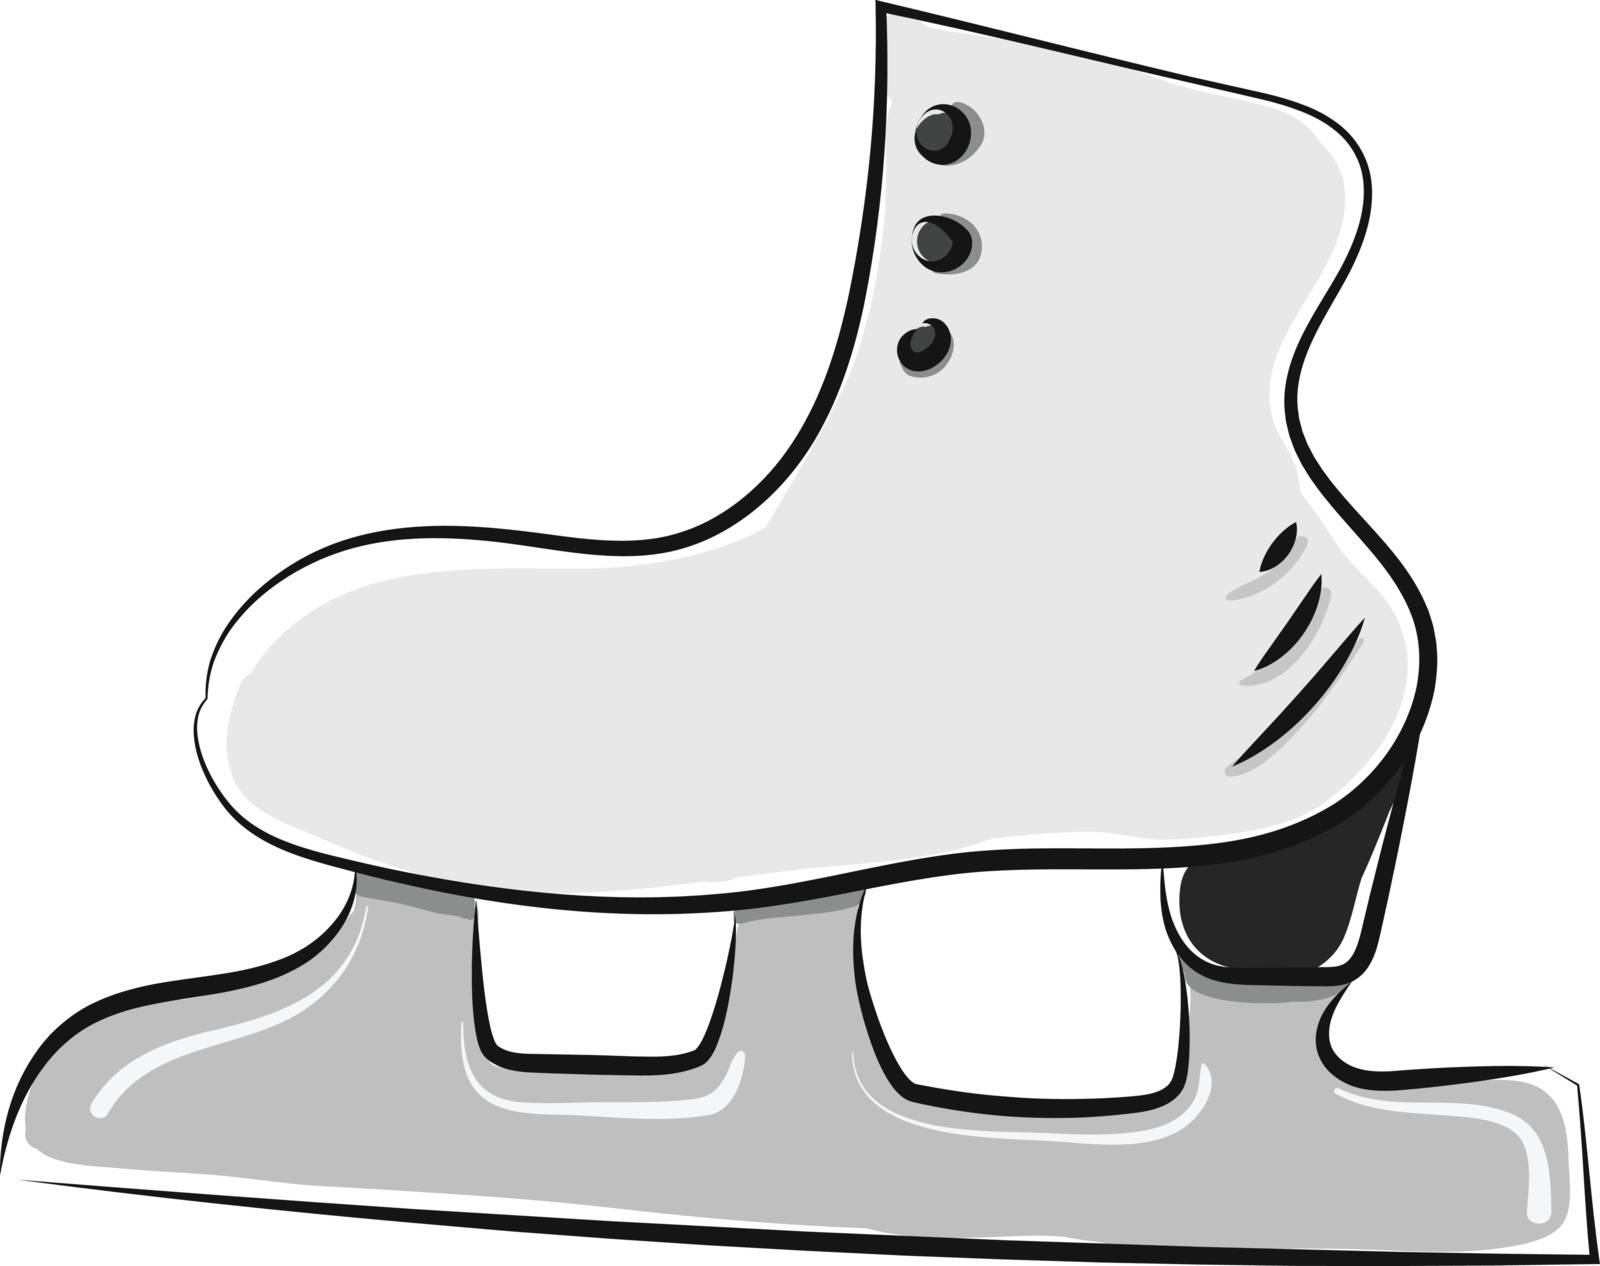 A single white ice skate with silver blade, vector, color drawing or illustration. 